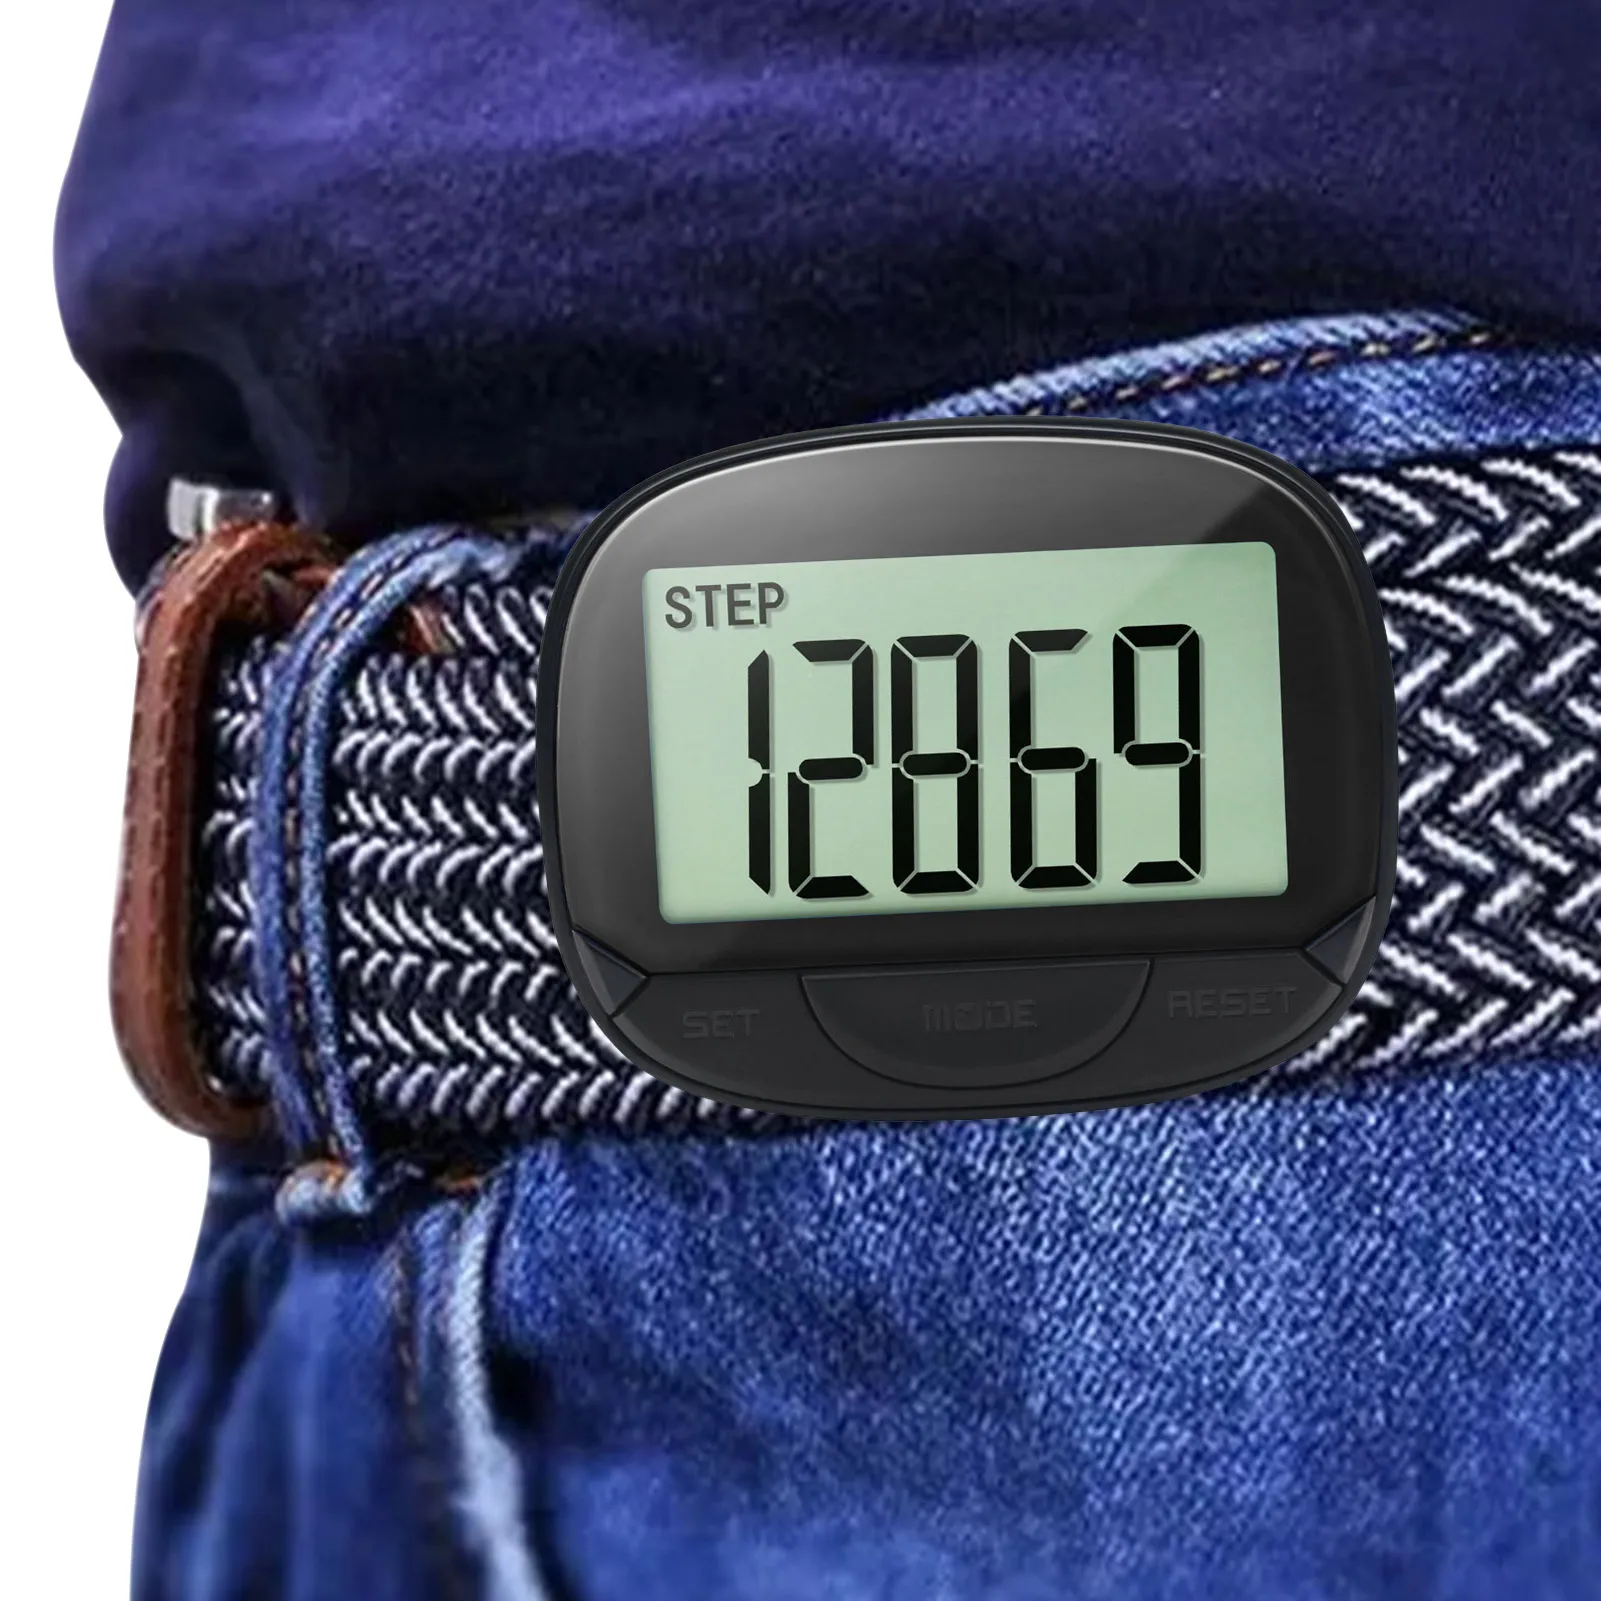 

Pedometer For Walking Digital Pedometer For Walking 55mm Large Screen With Clock Accurate Step Counter Walking Distance Calorie